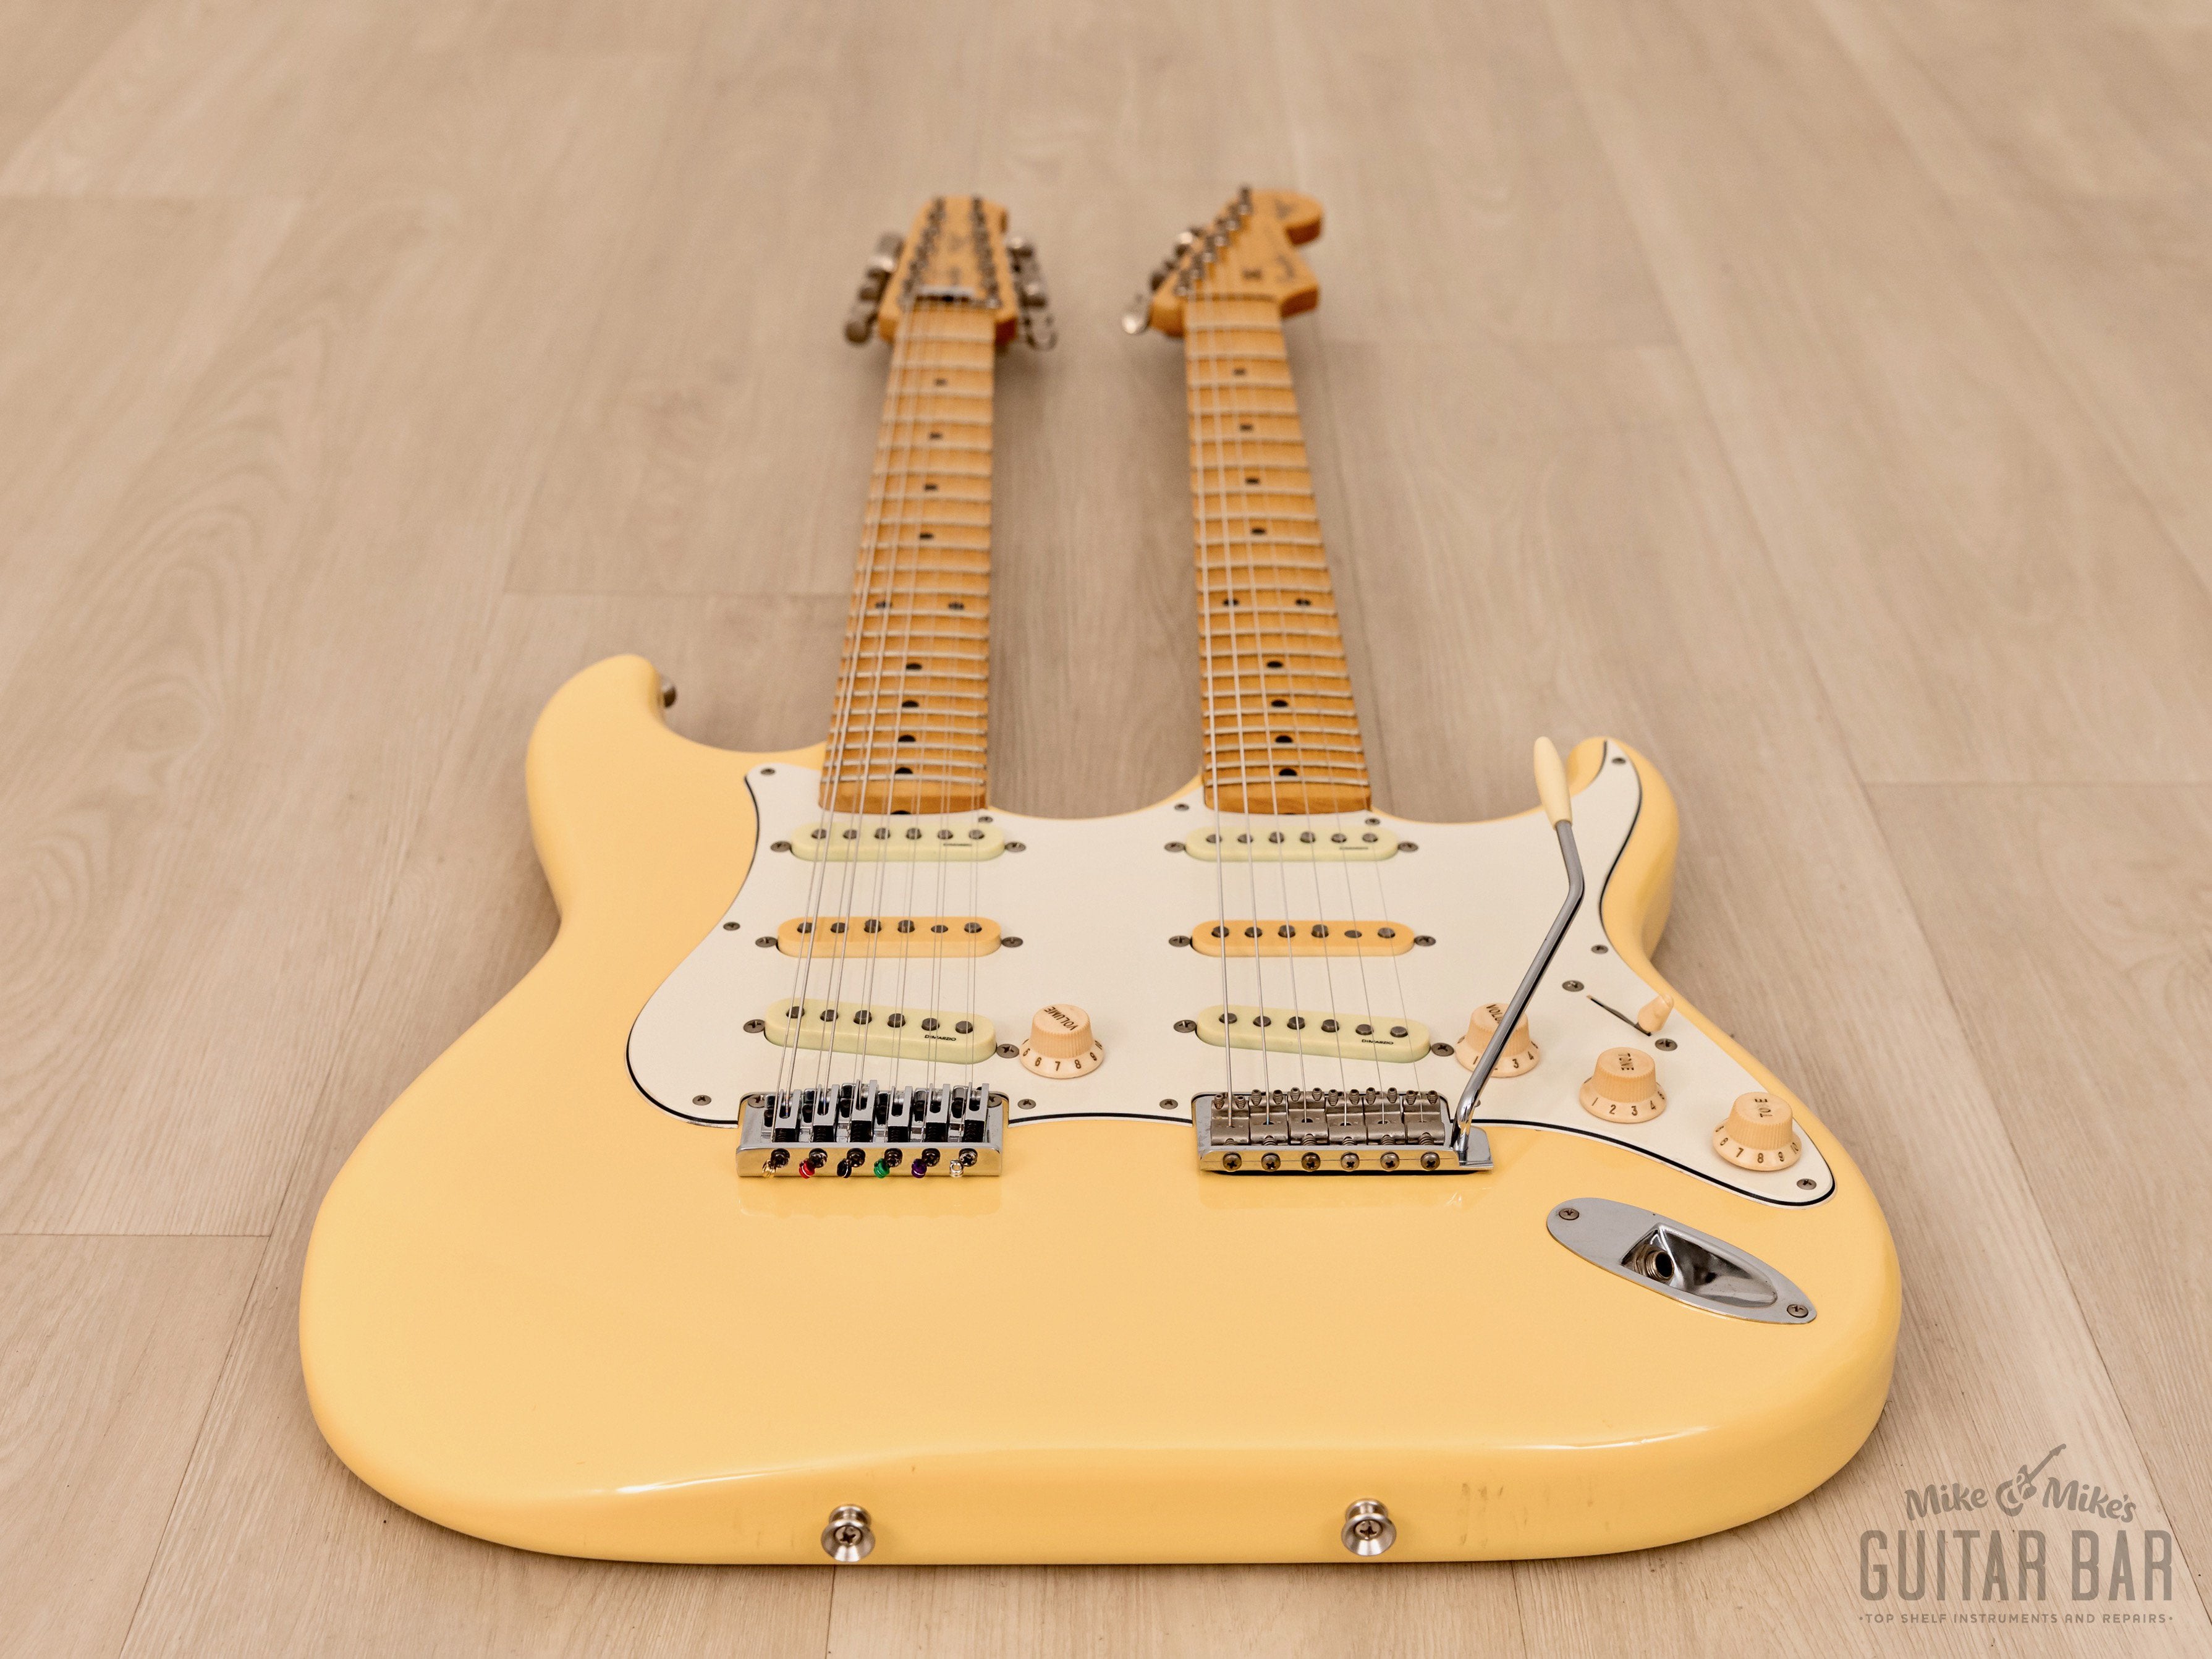 1995 Fender Yngwie Malmsteen Signature Stratocaster Double Neck STW-230YJM w/ Case & Tags, Japan MIJ